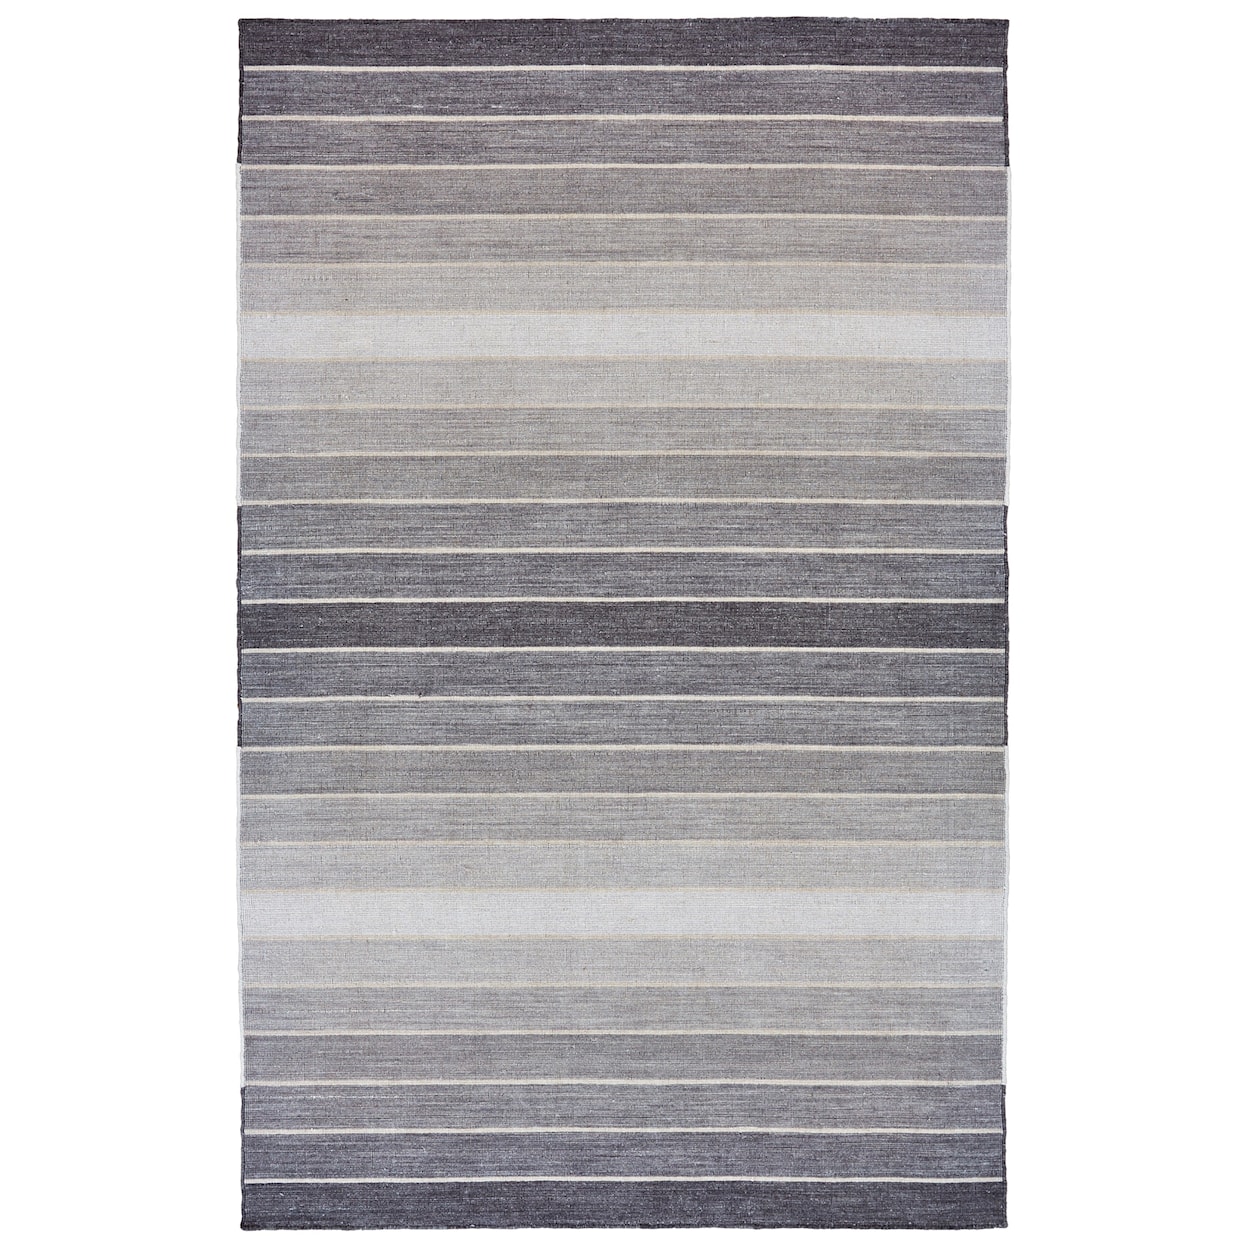 Feizy Rugs Santino Light Gray 9' x 9 Square Area Rug